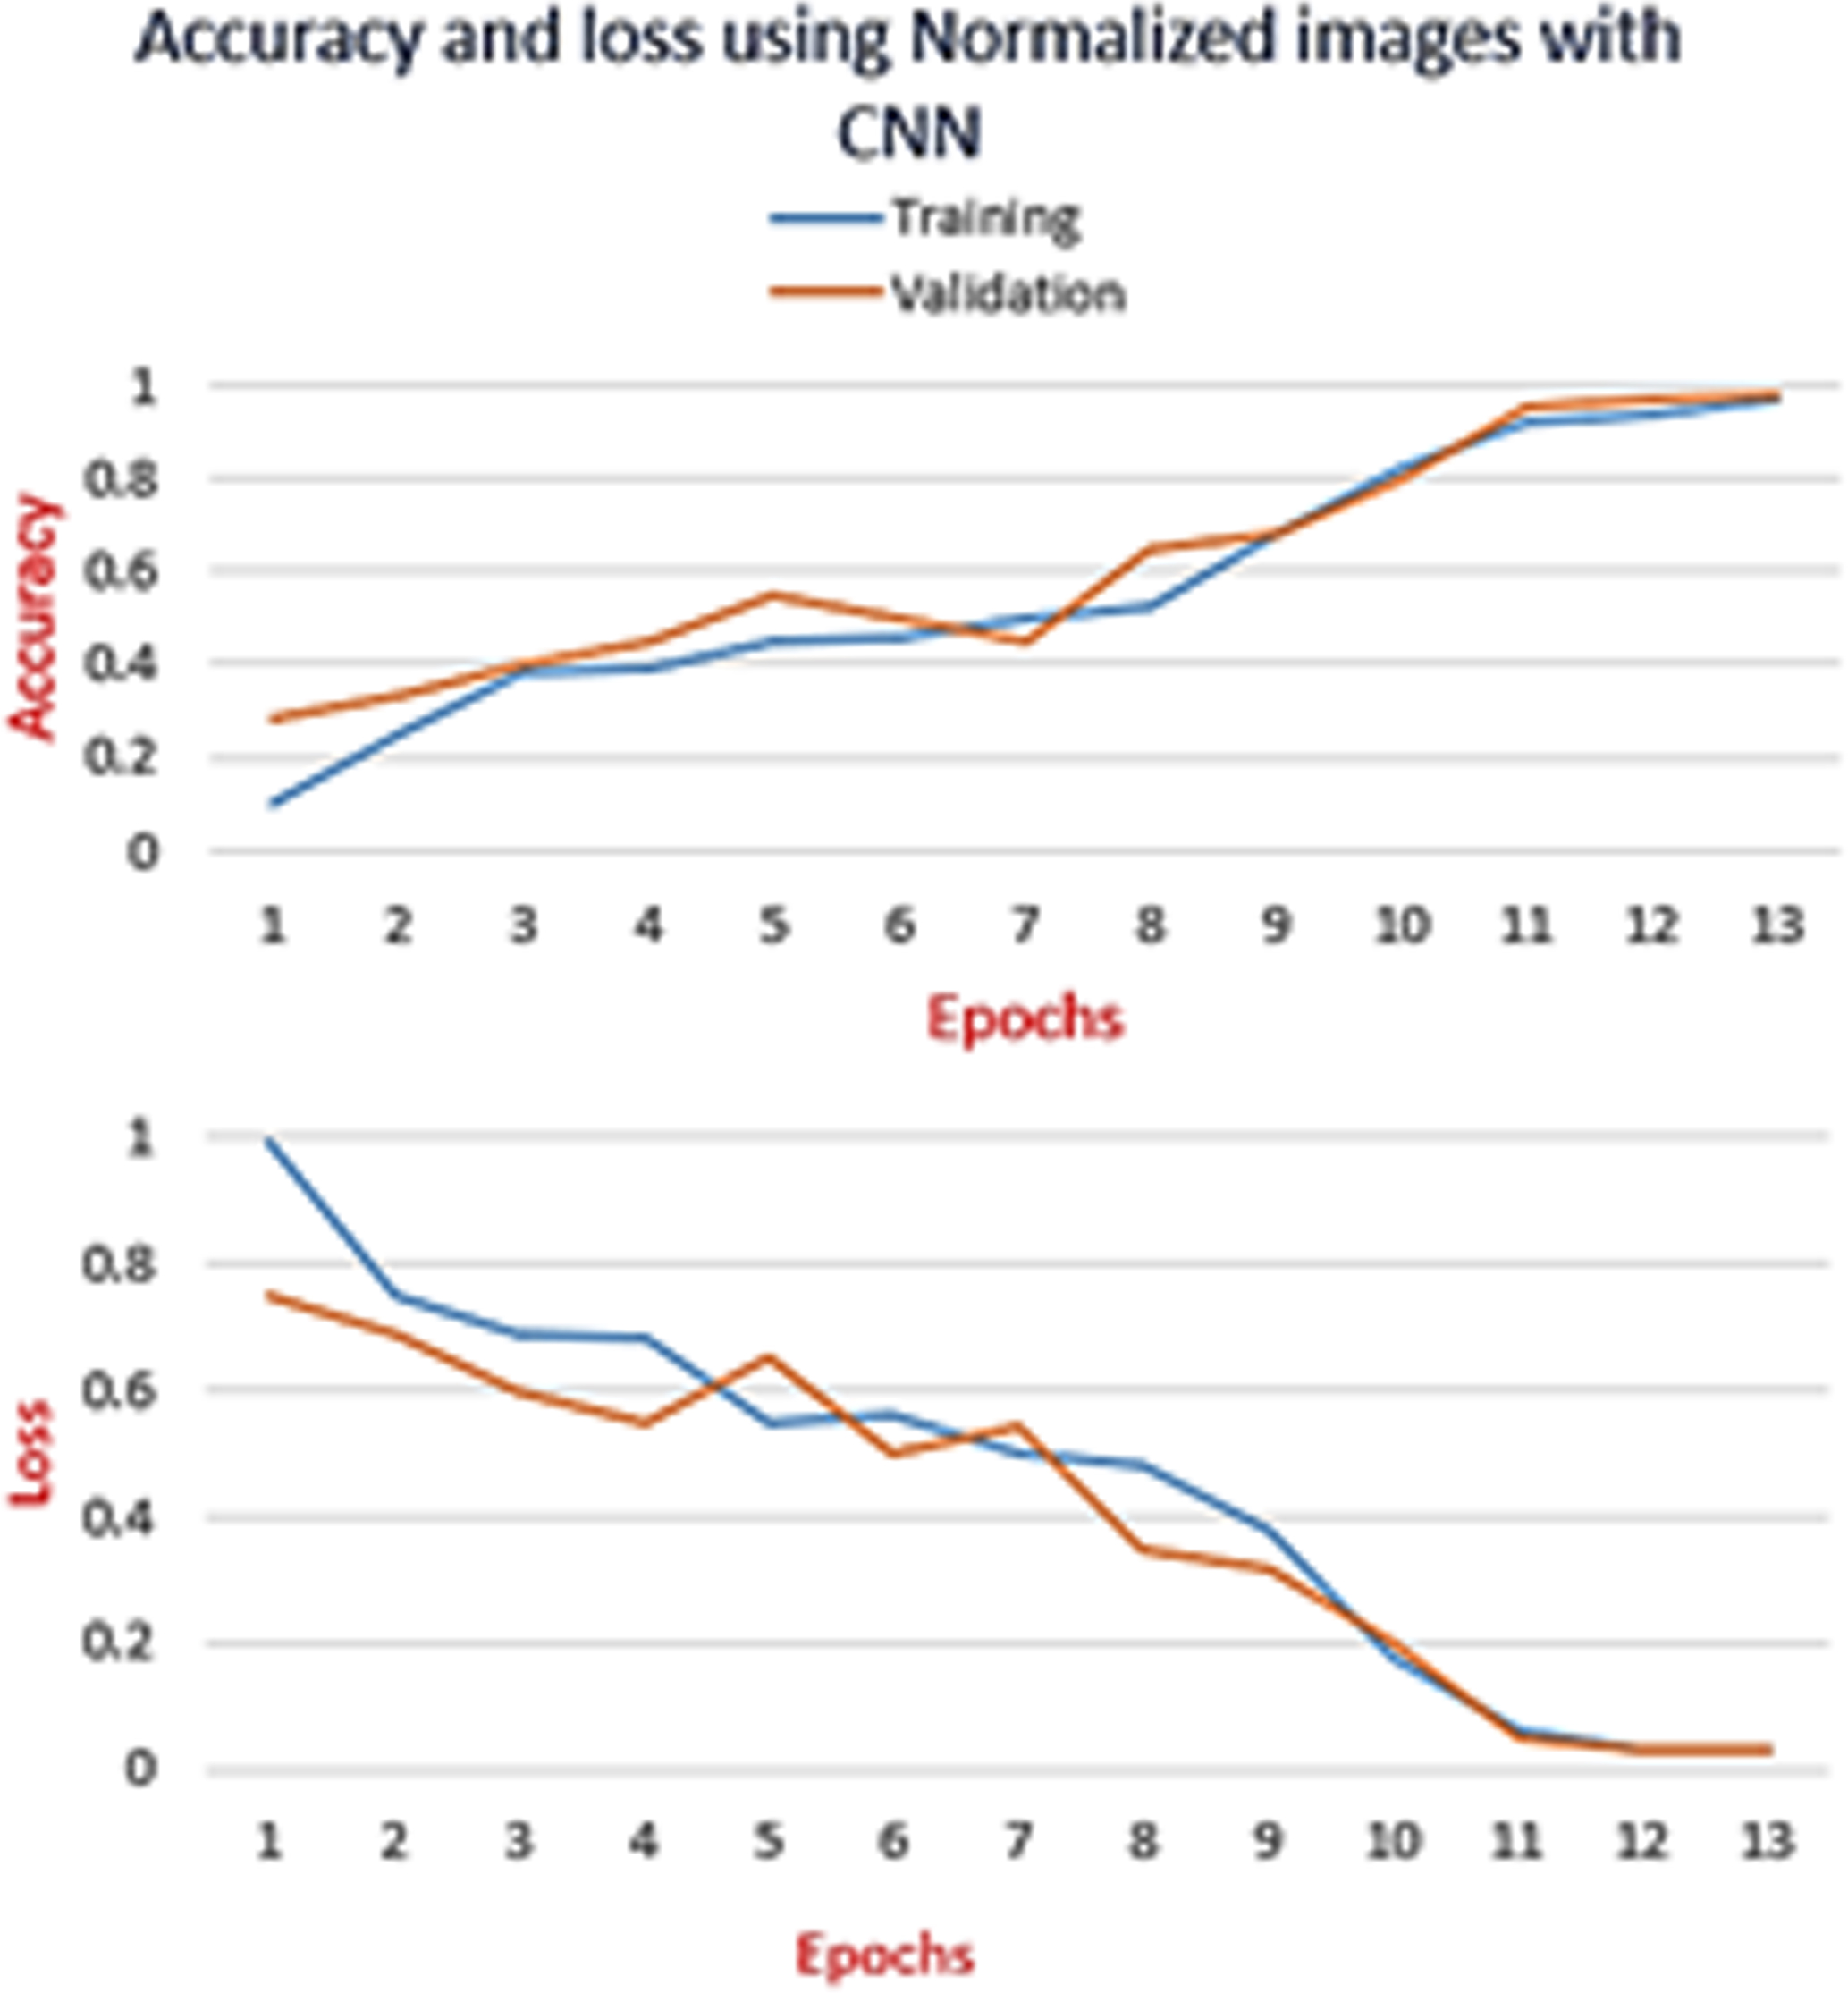 CNN model: Graphs of training accuracy and loss for Normalized images